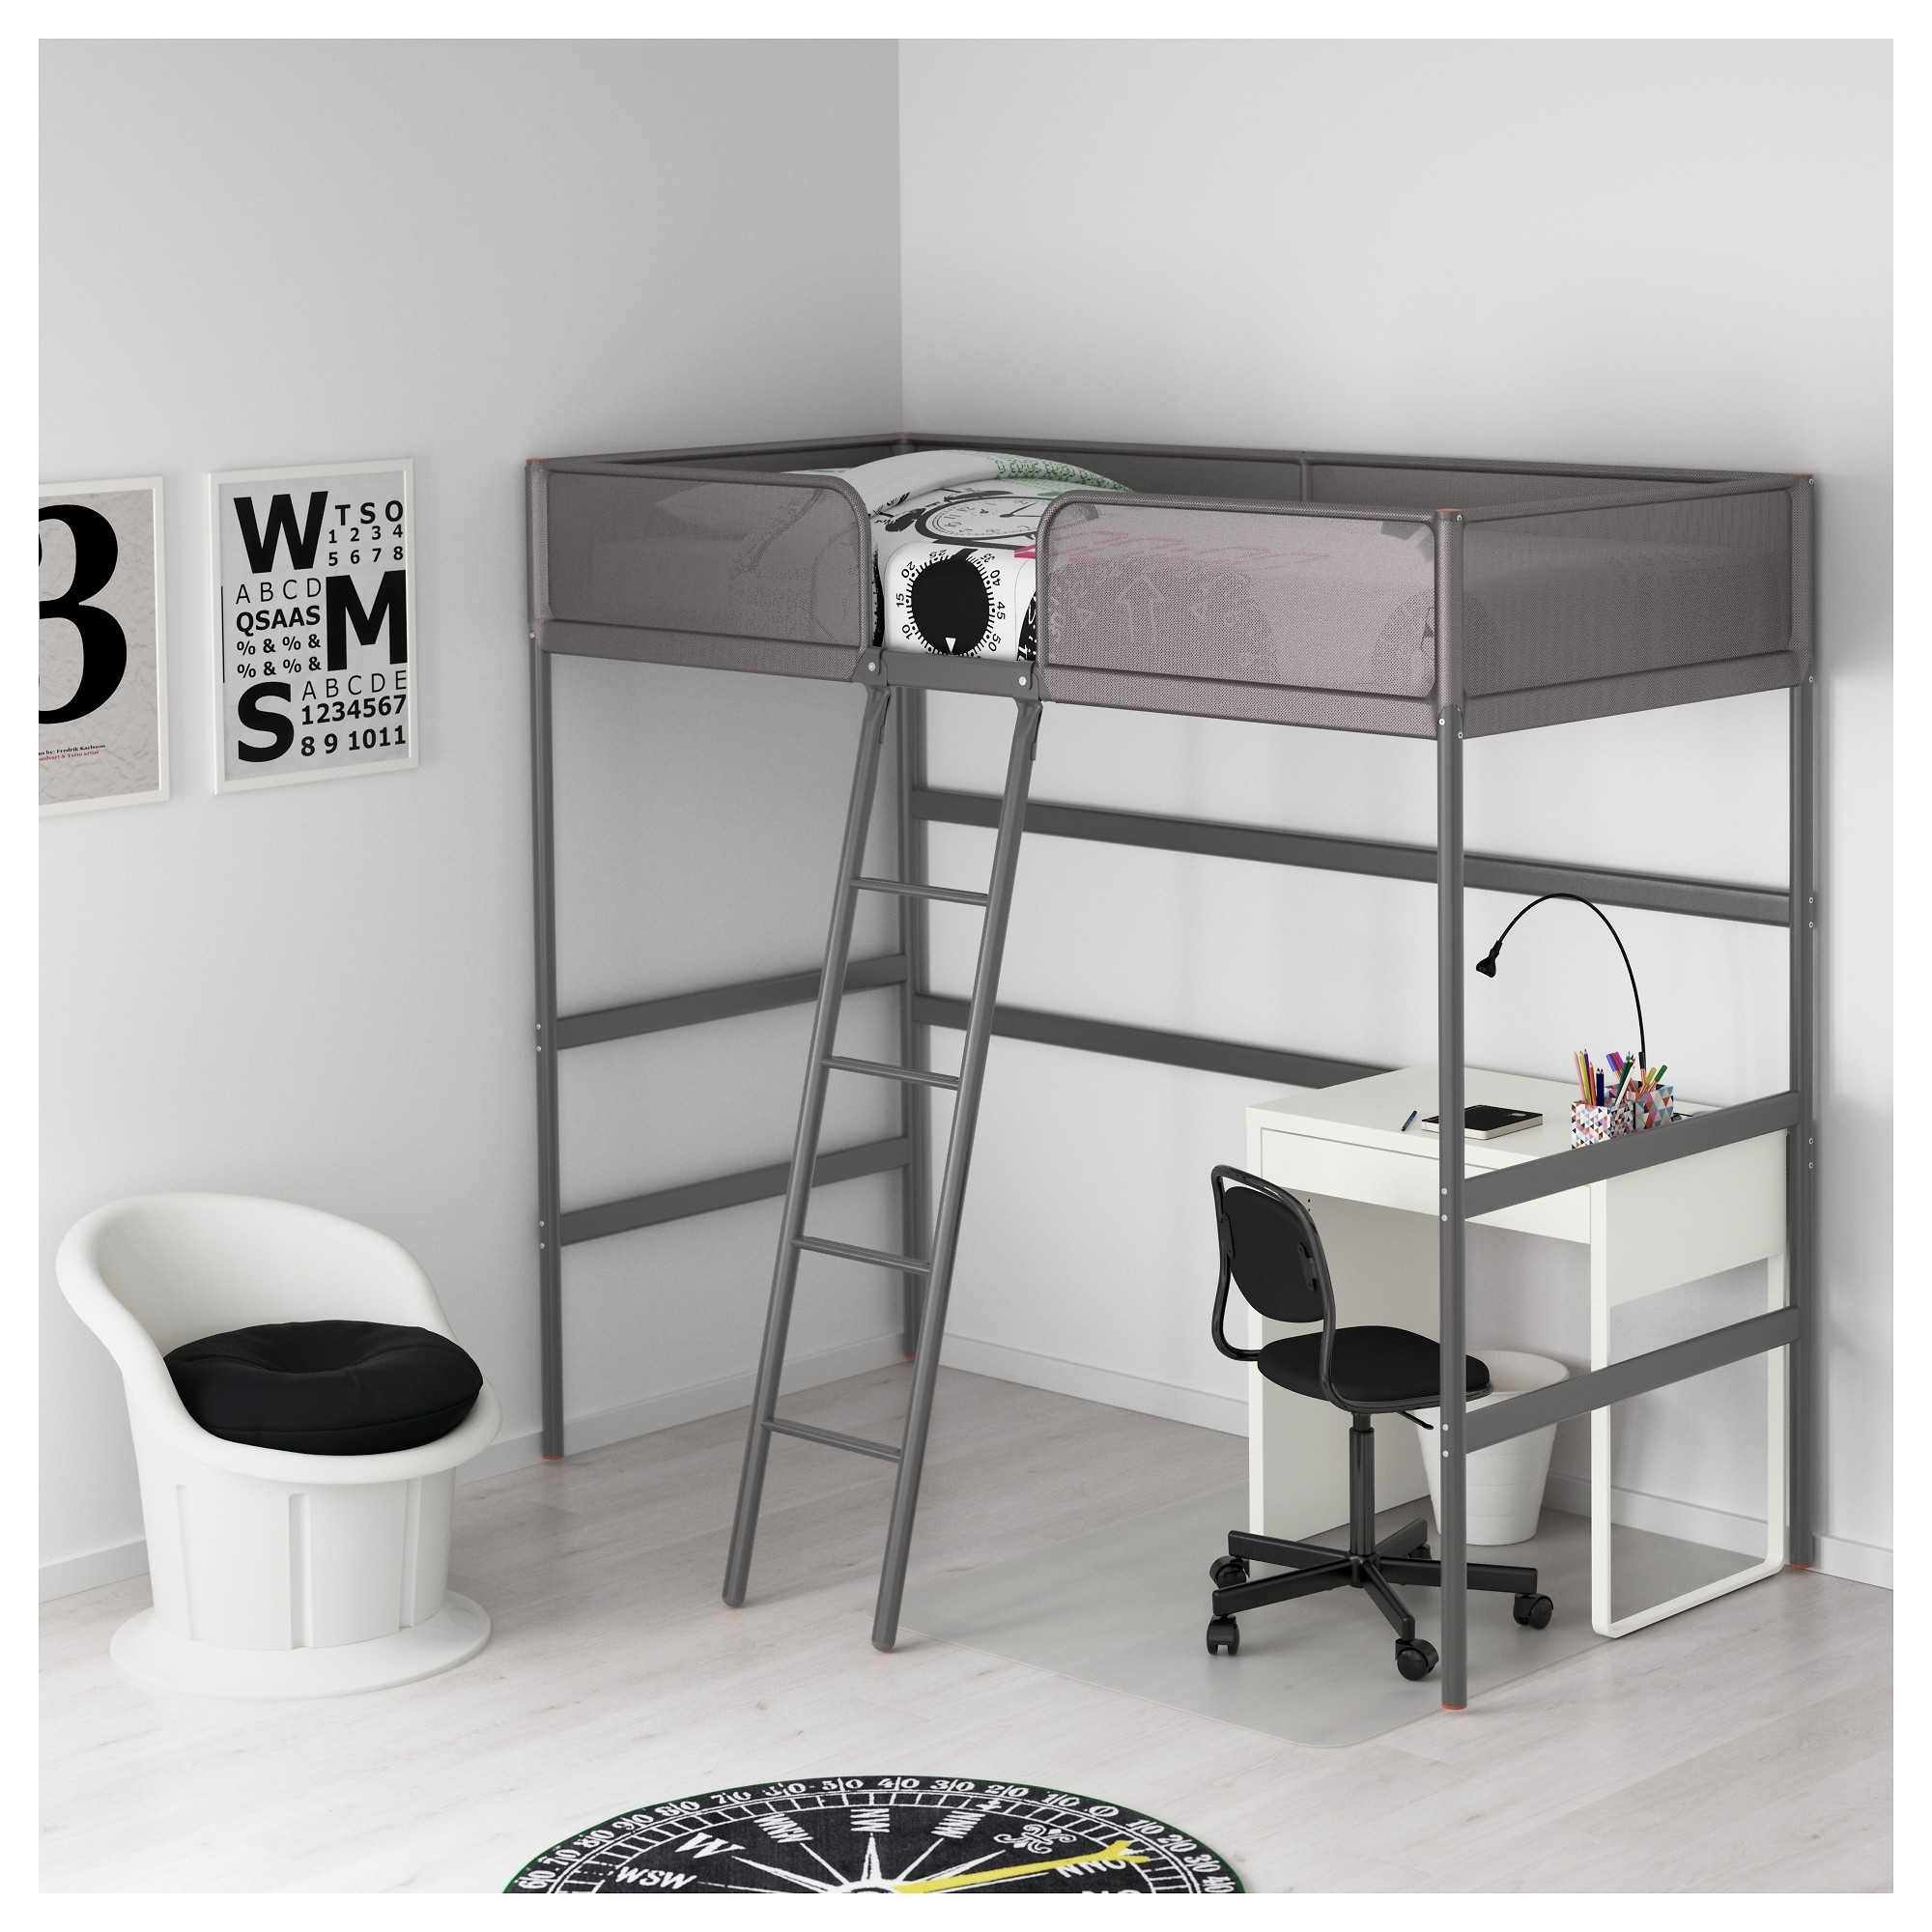 Ikea Loft Beds To Or Not In, Ikea Stuva Loft Bed Weight Limit